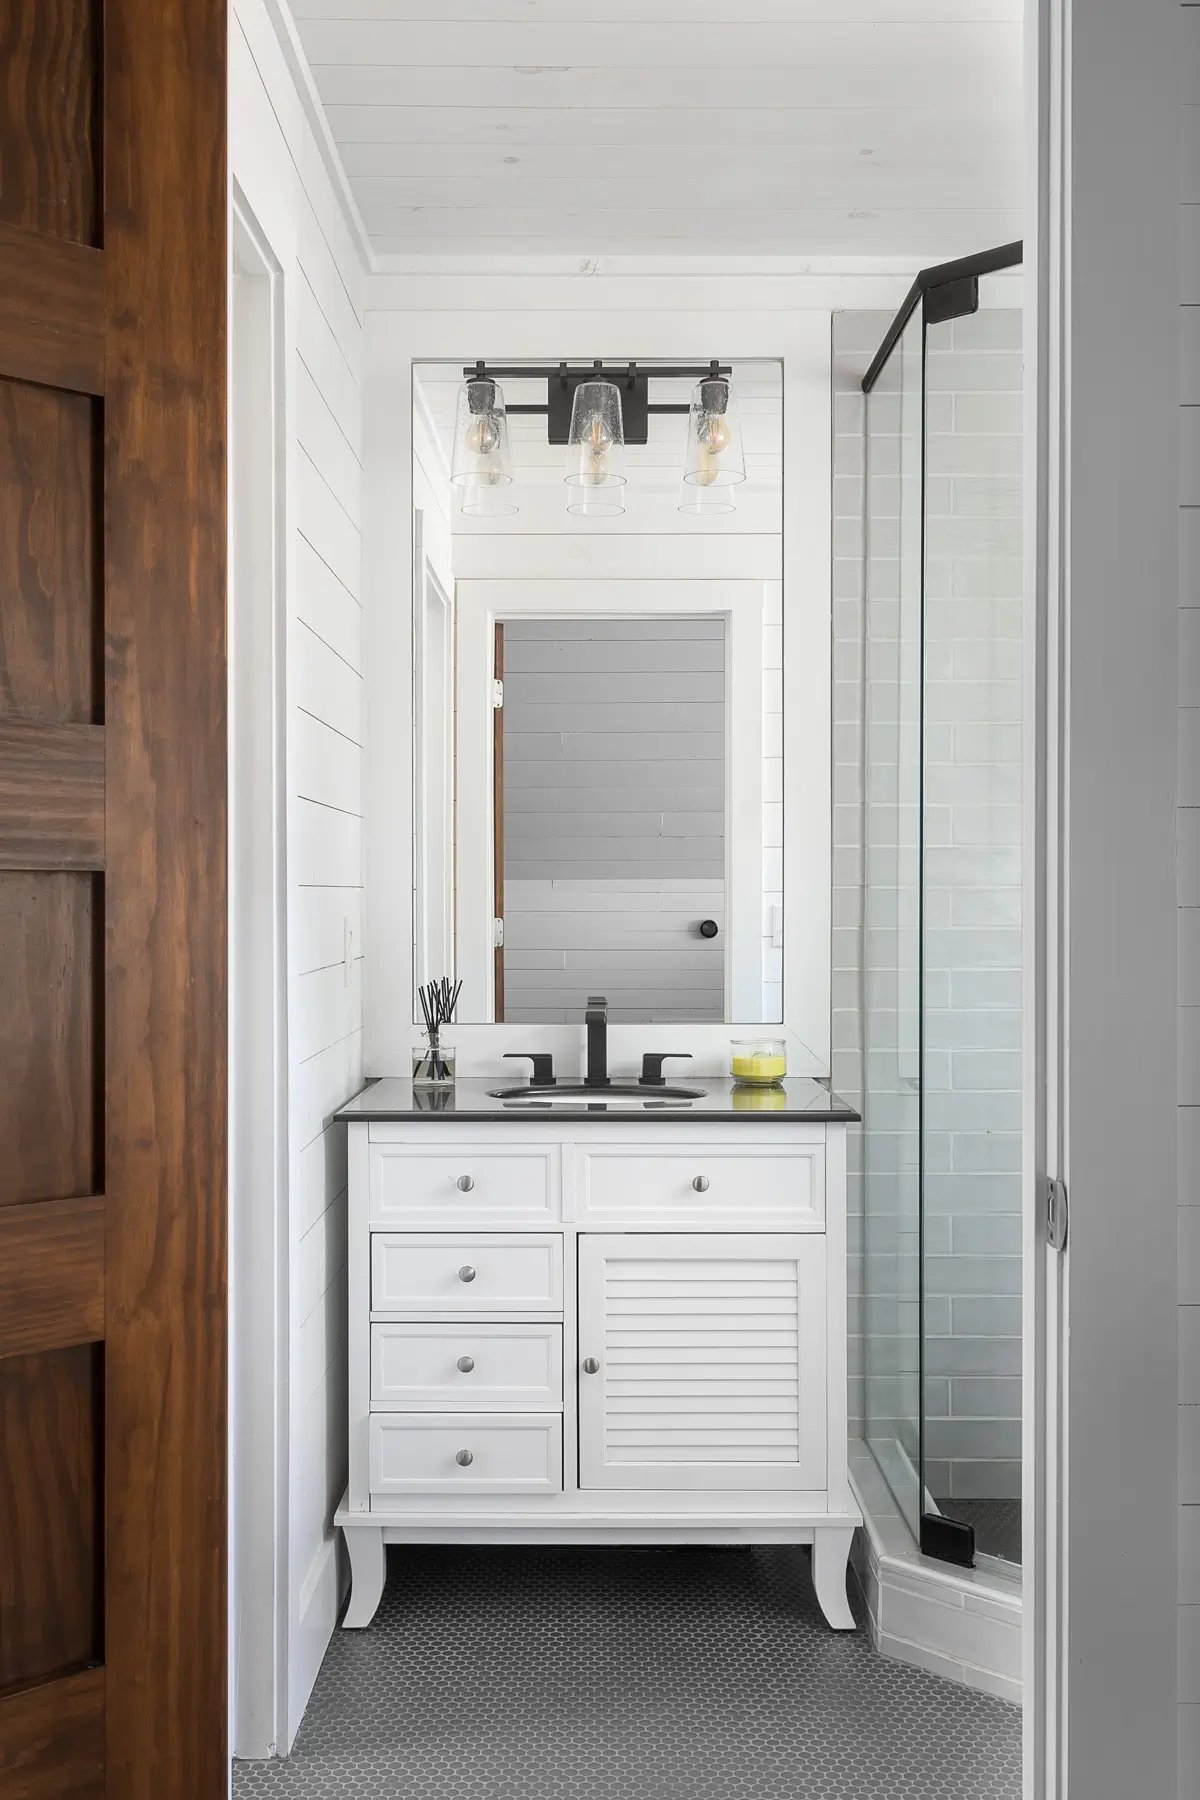 Chic bathroom vanity with black fixtures, subway tile shower, and industrial-style lights.